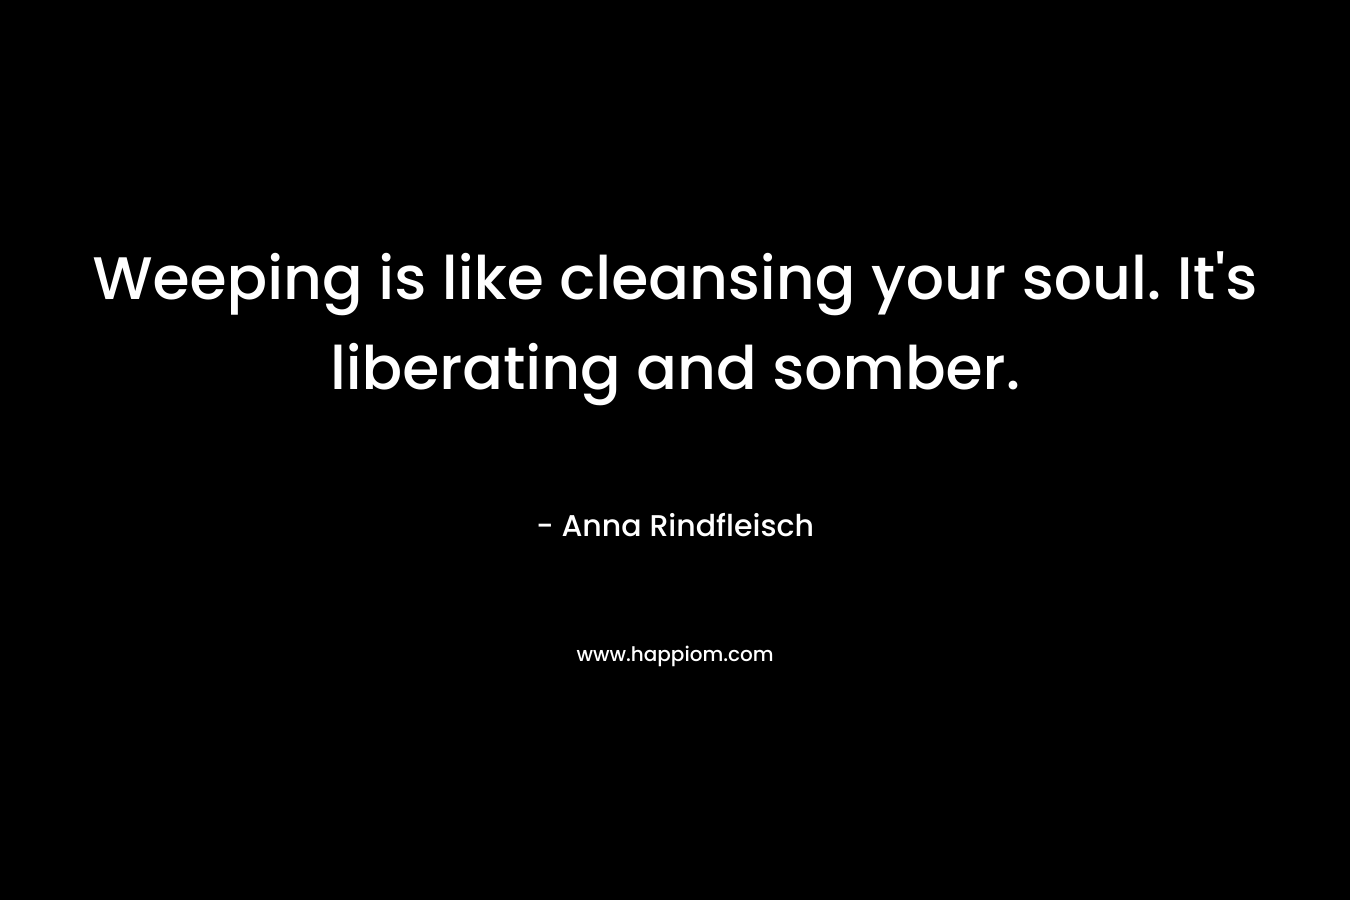 Weeping is like cleansing your soul. It’s liberating and somber. – Anna Rindfleisch